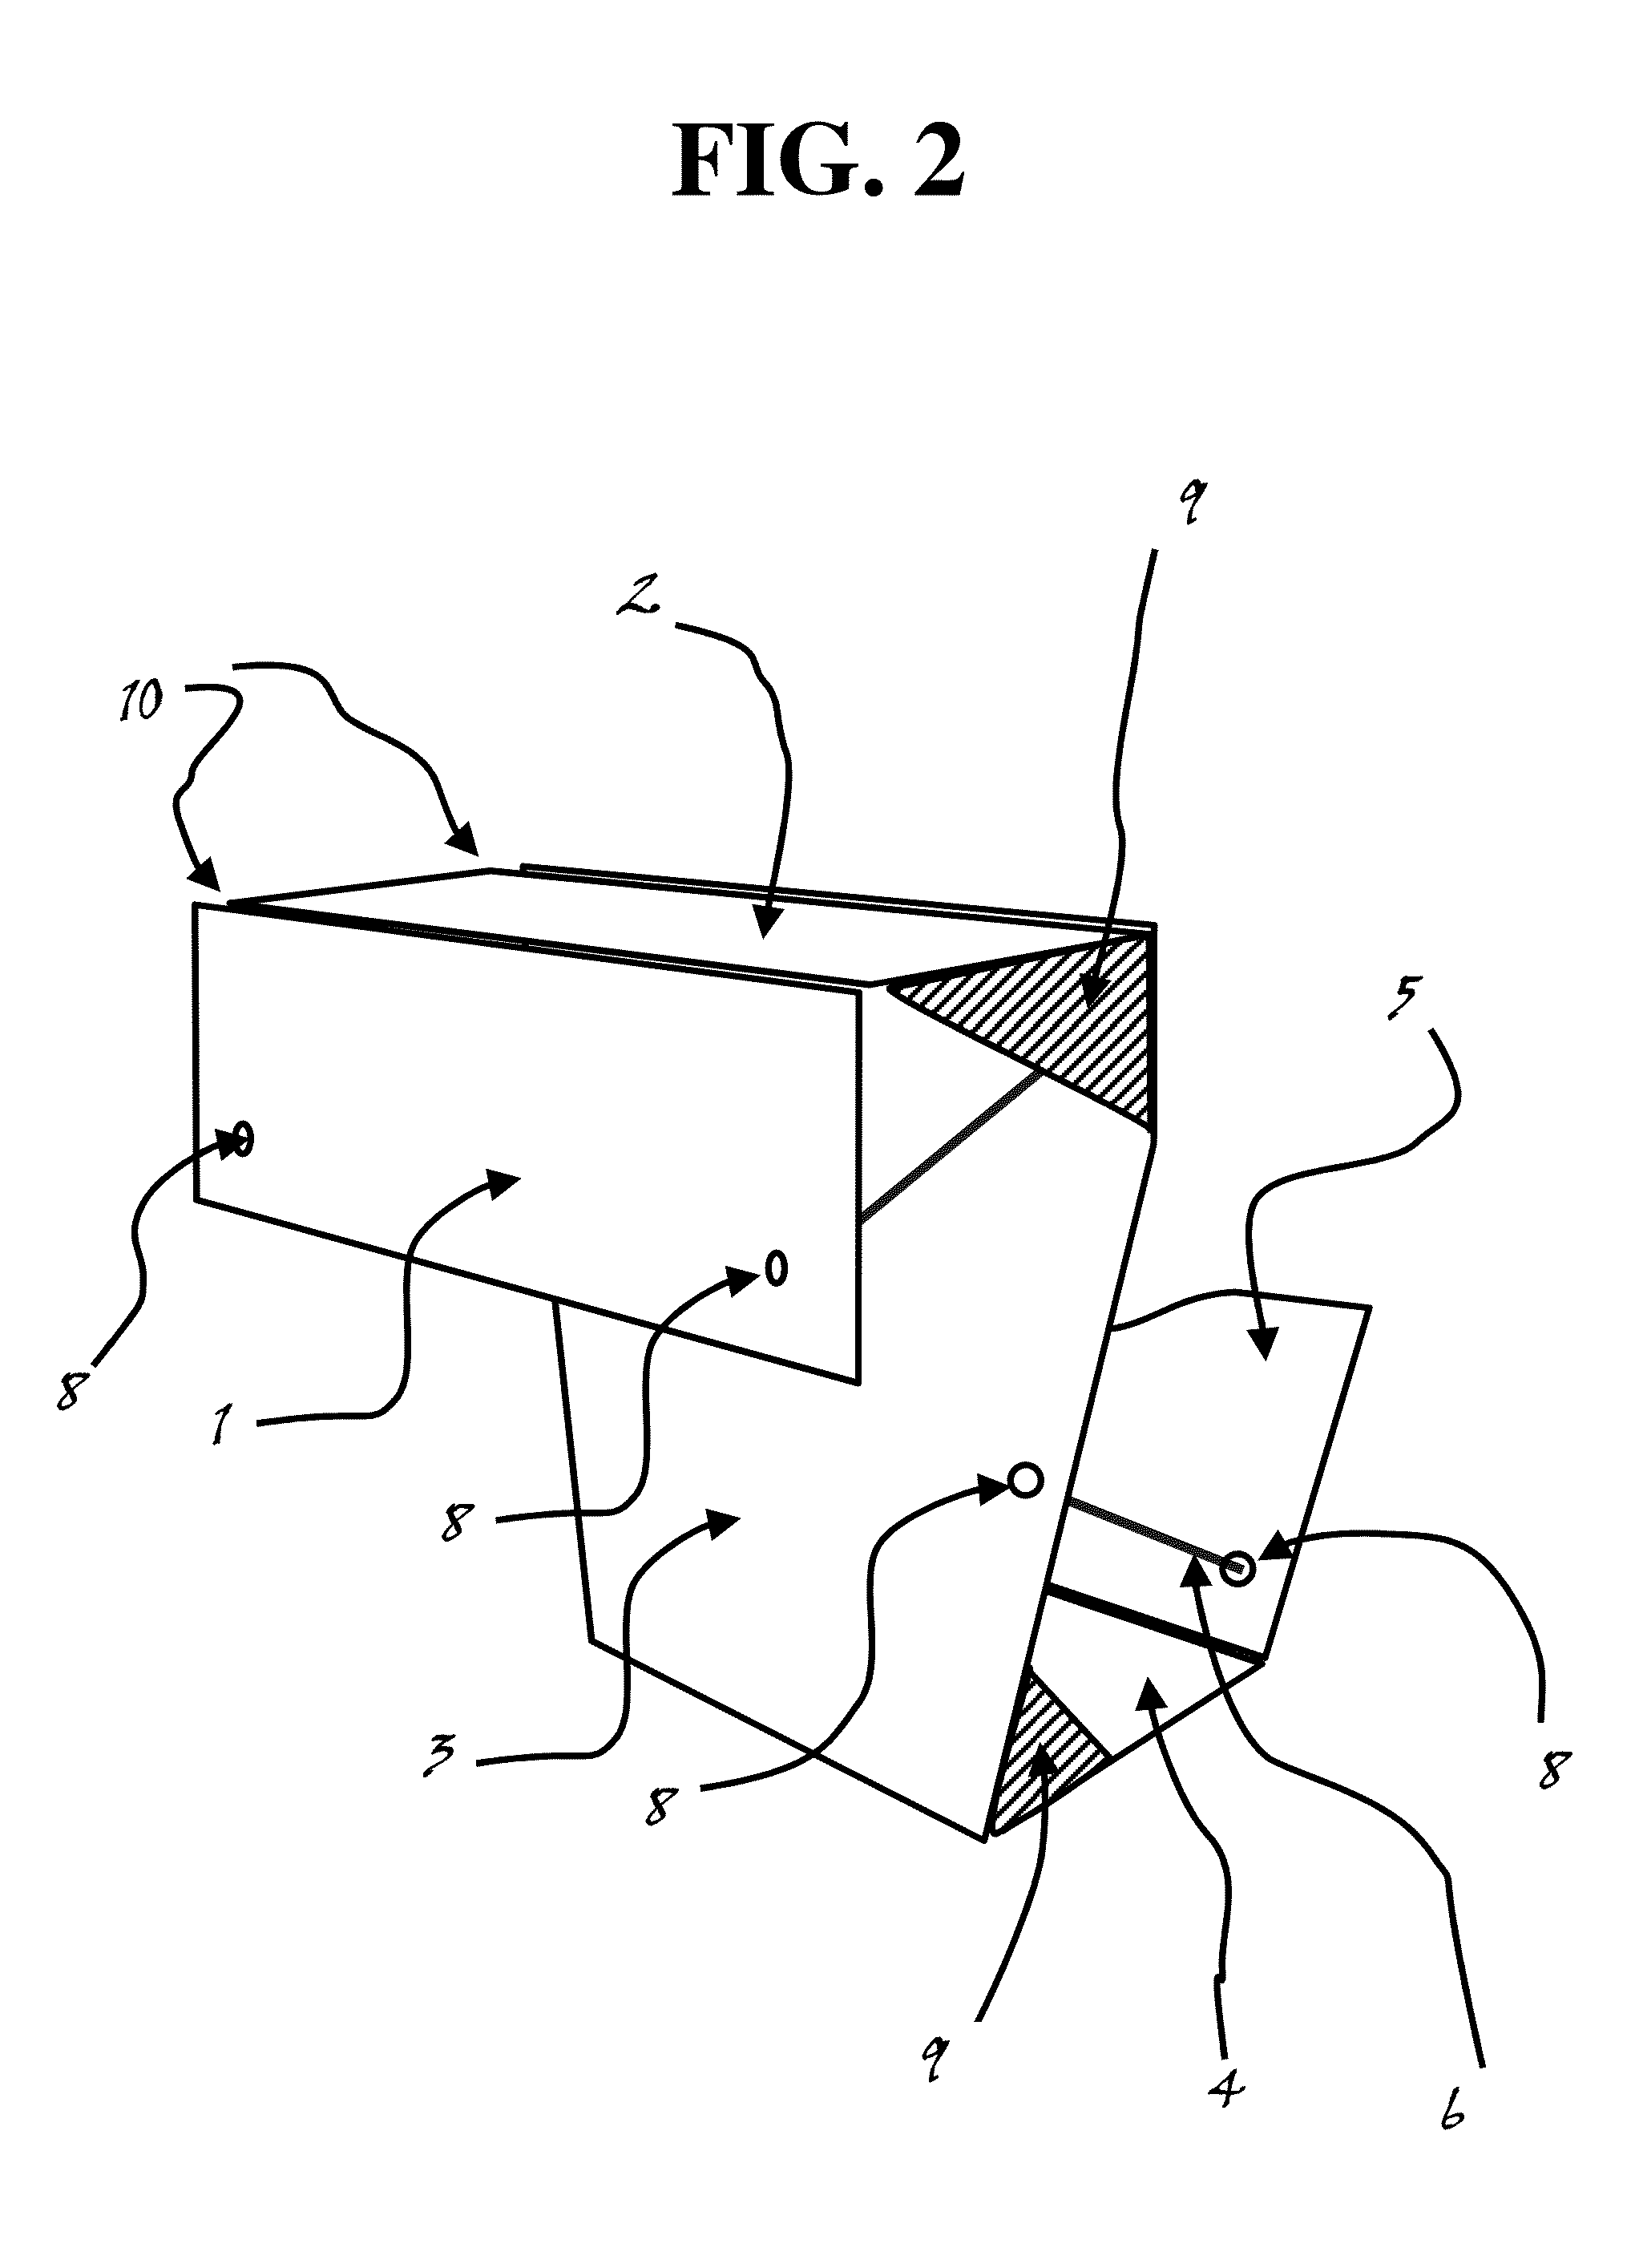 Folding travel support device and method for using the same